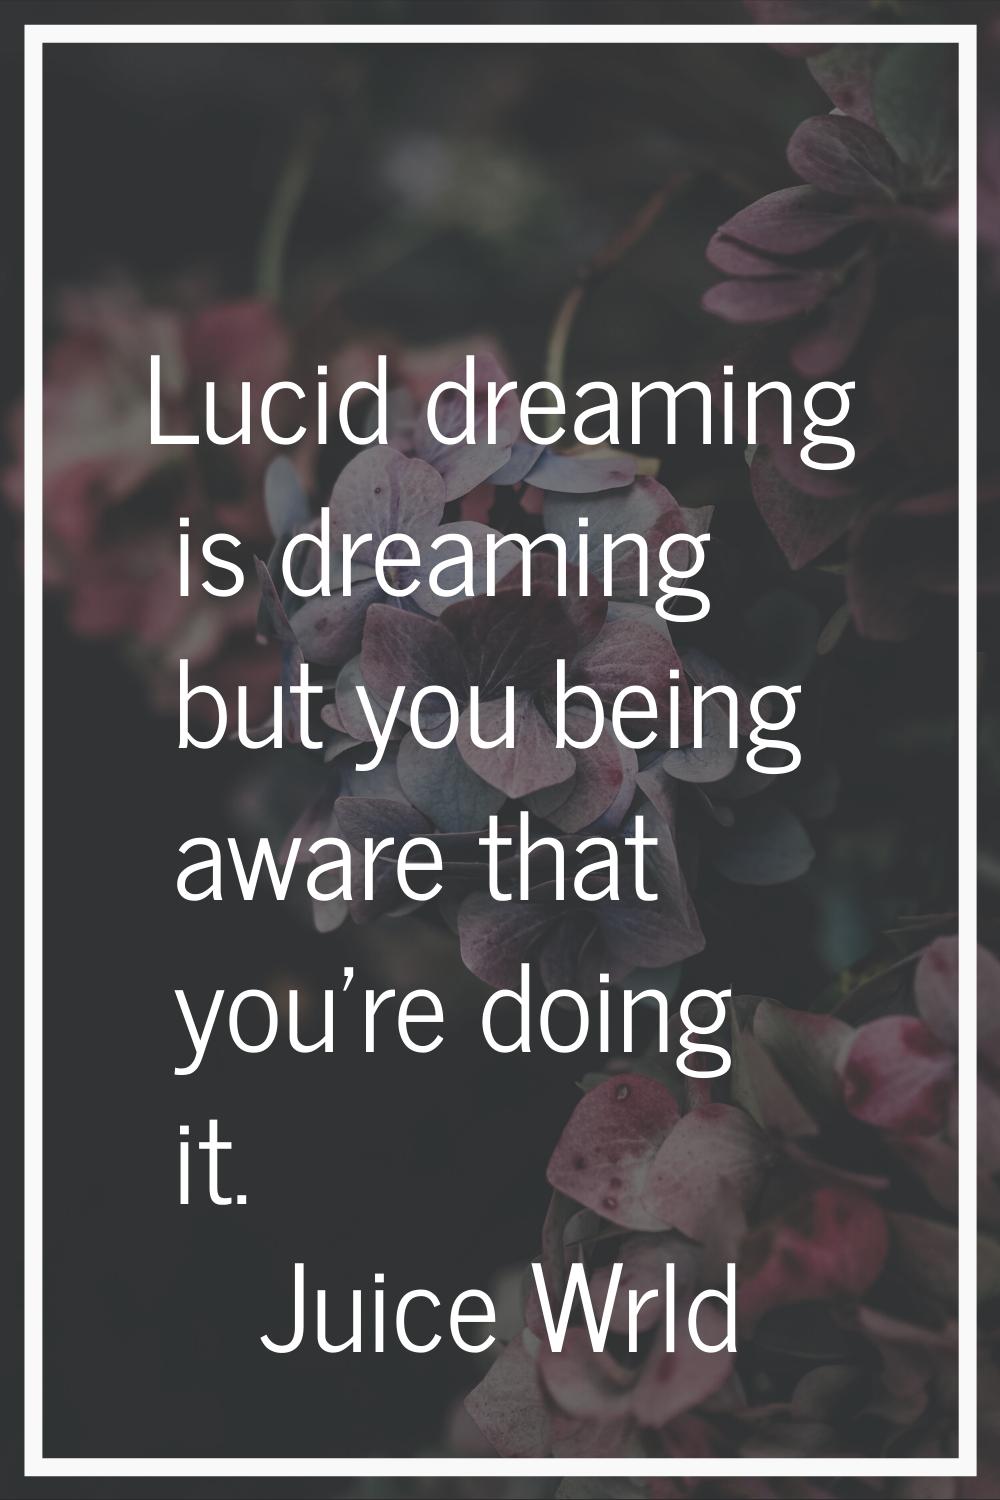 Lucid dreaming is dreaming but you being aware that you're doing it.